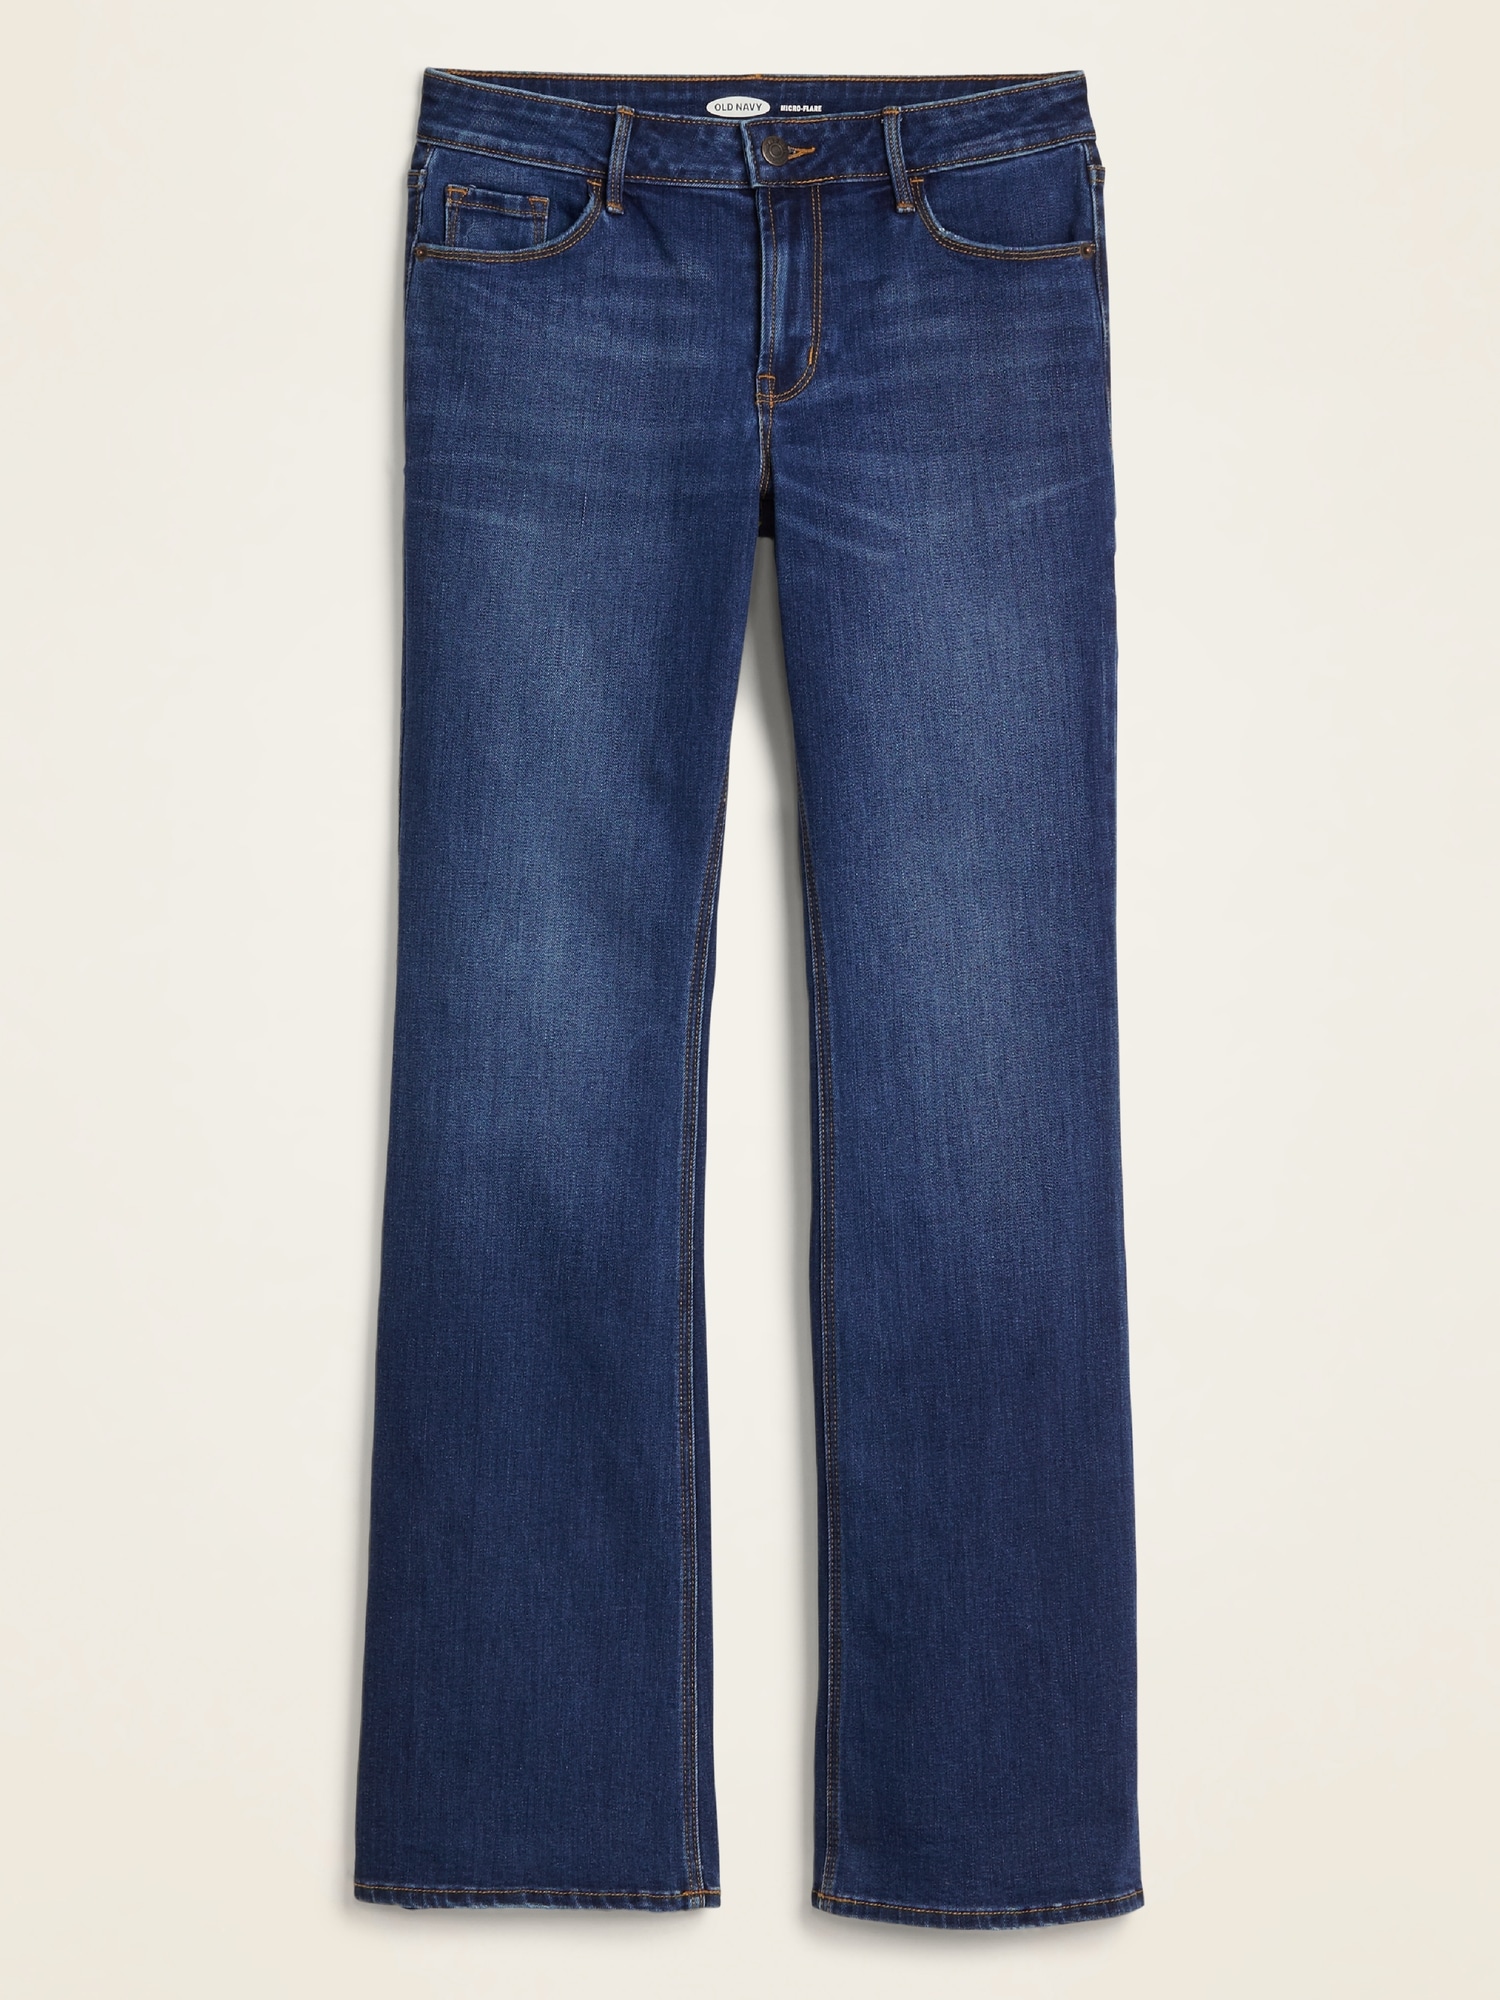 old navy plus size flare jeans